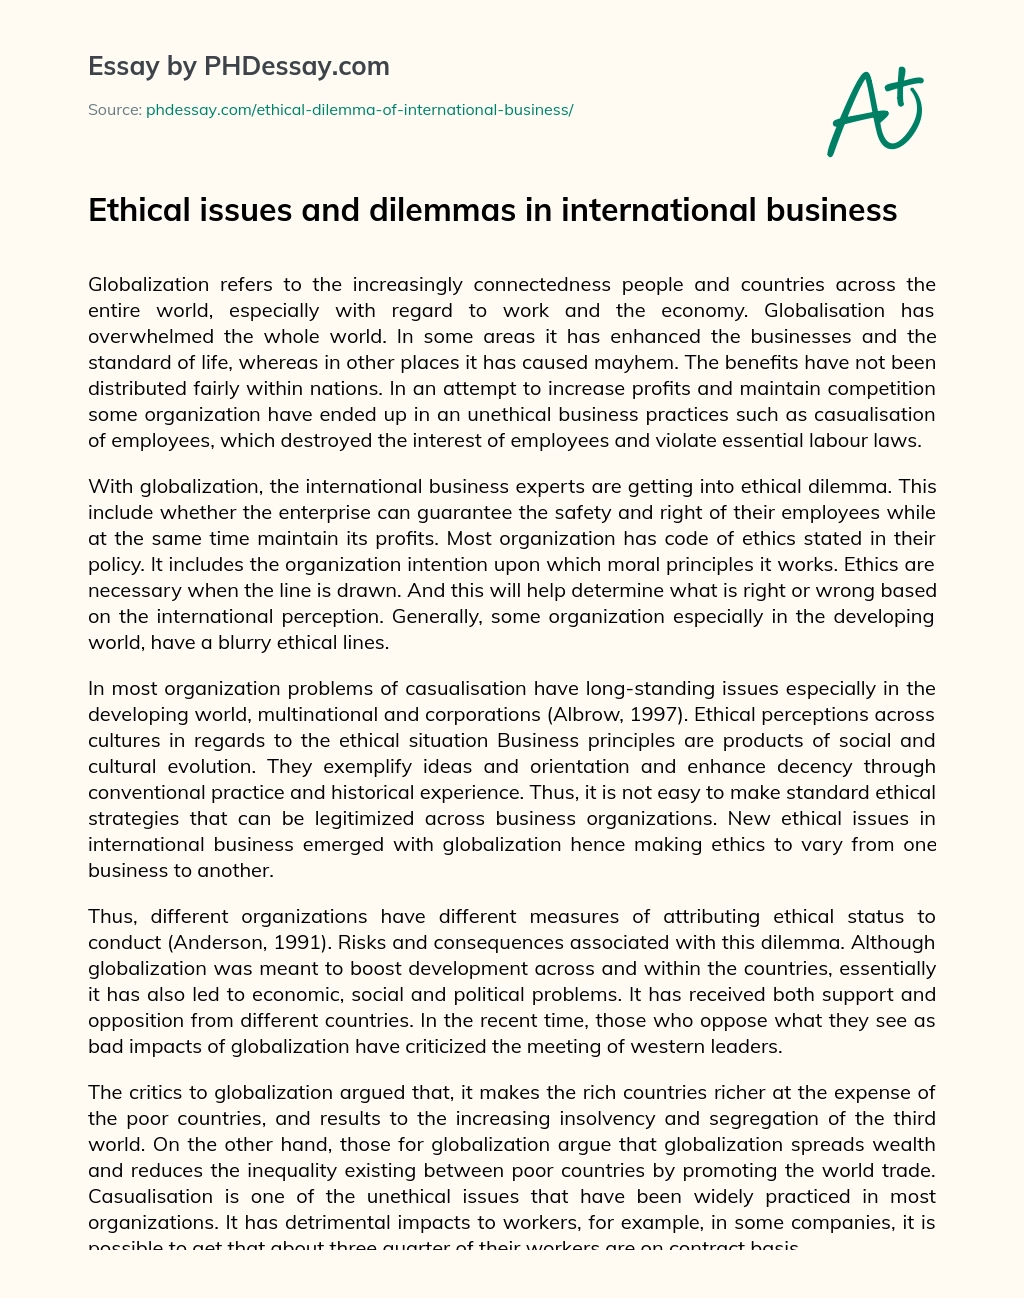 Ethical issues and dilemmas in international business essay